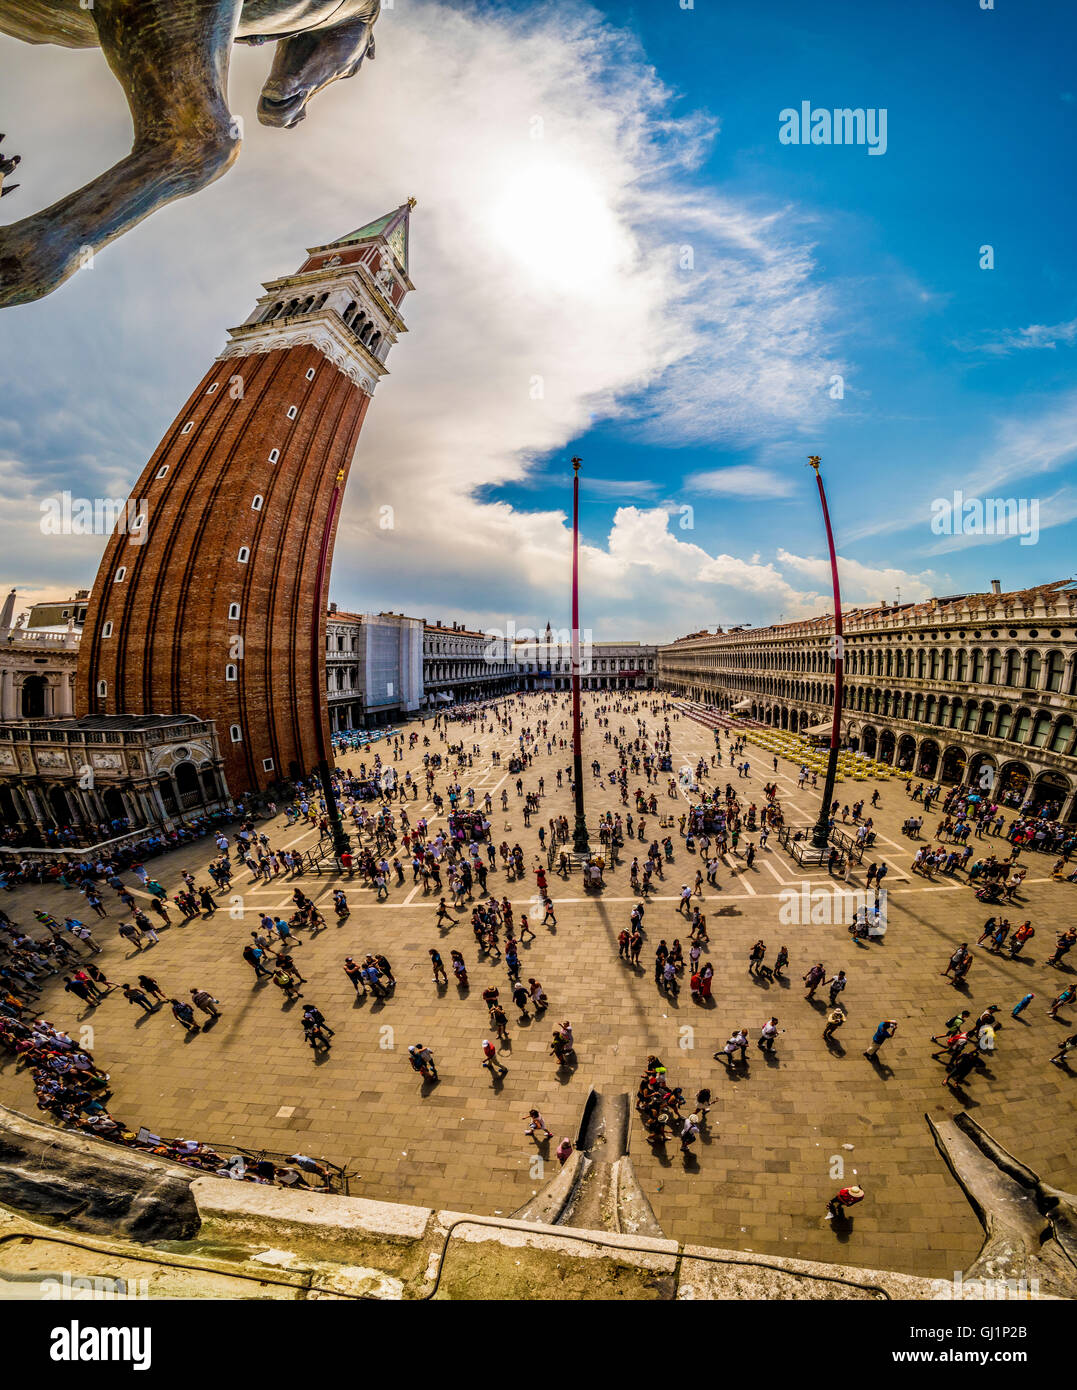 Fisheye shot of San Marco Campanile, with a busy Piazza San Marco, Venice, Italy. Stock Photo